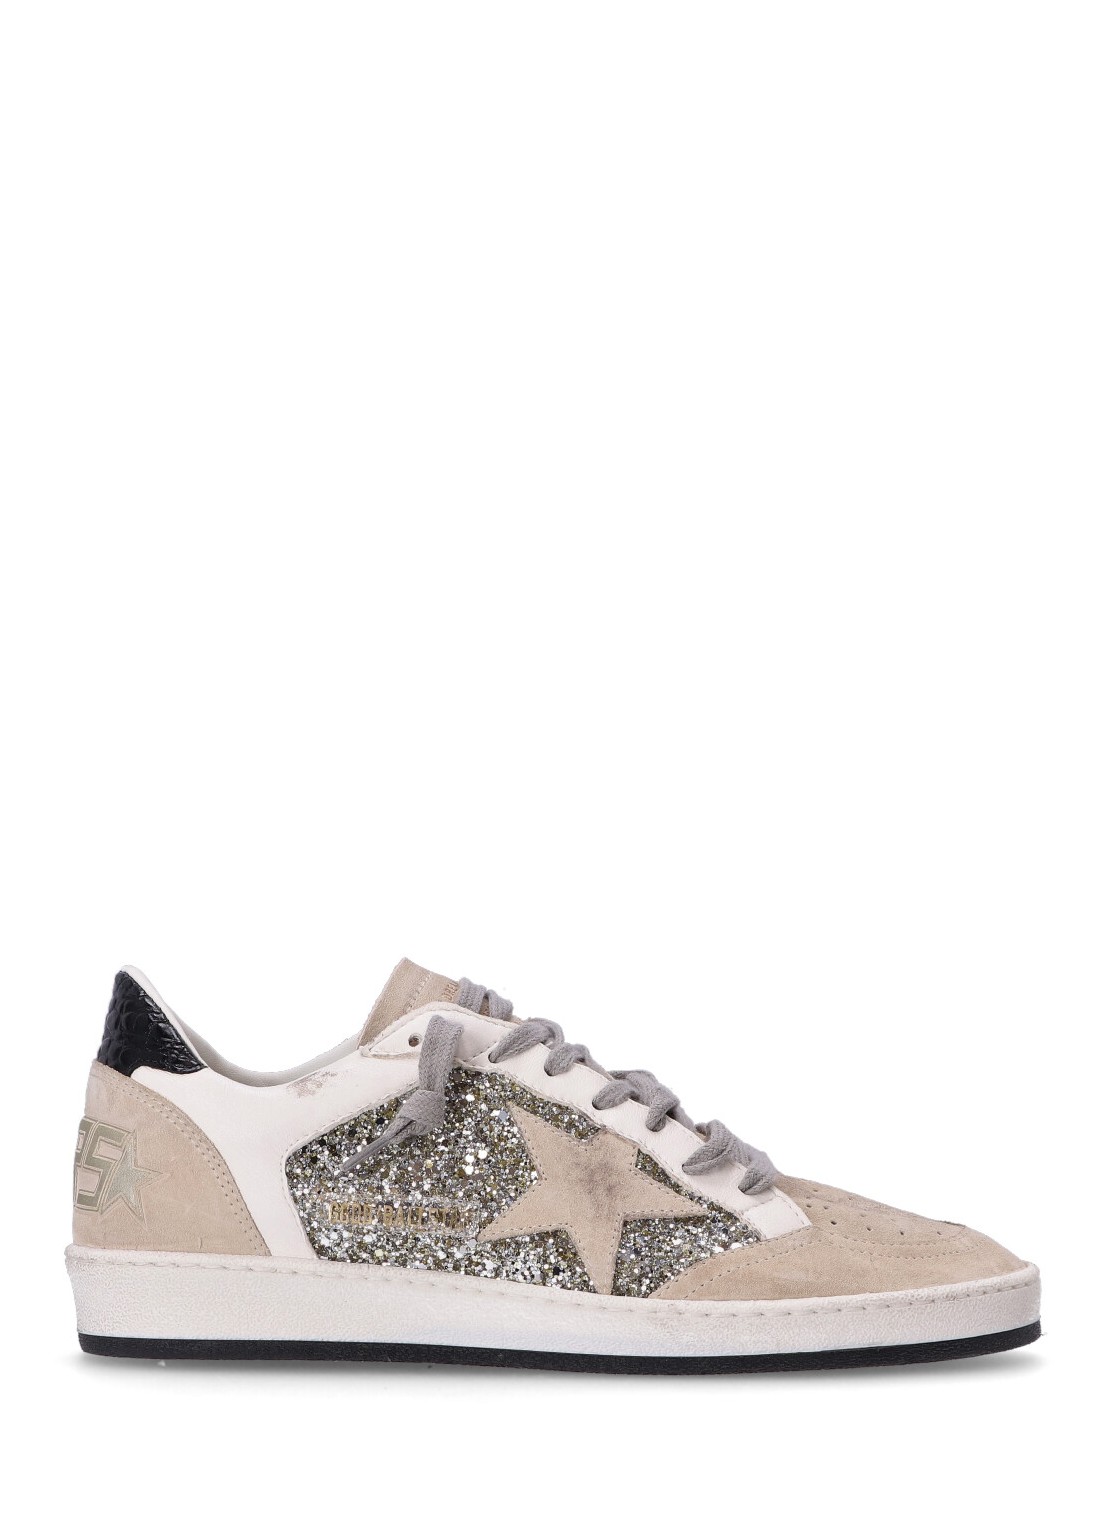 Sneaker golden goose sneaker woman ball star glitter and leather gwf00327f005430 70159 talla 37
 